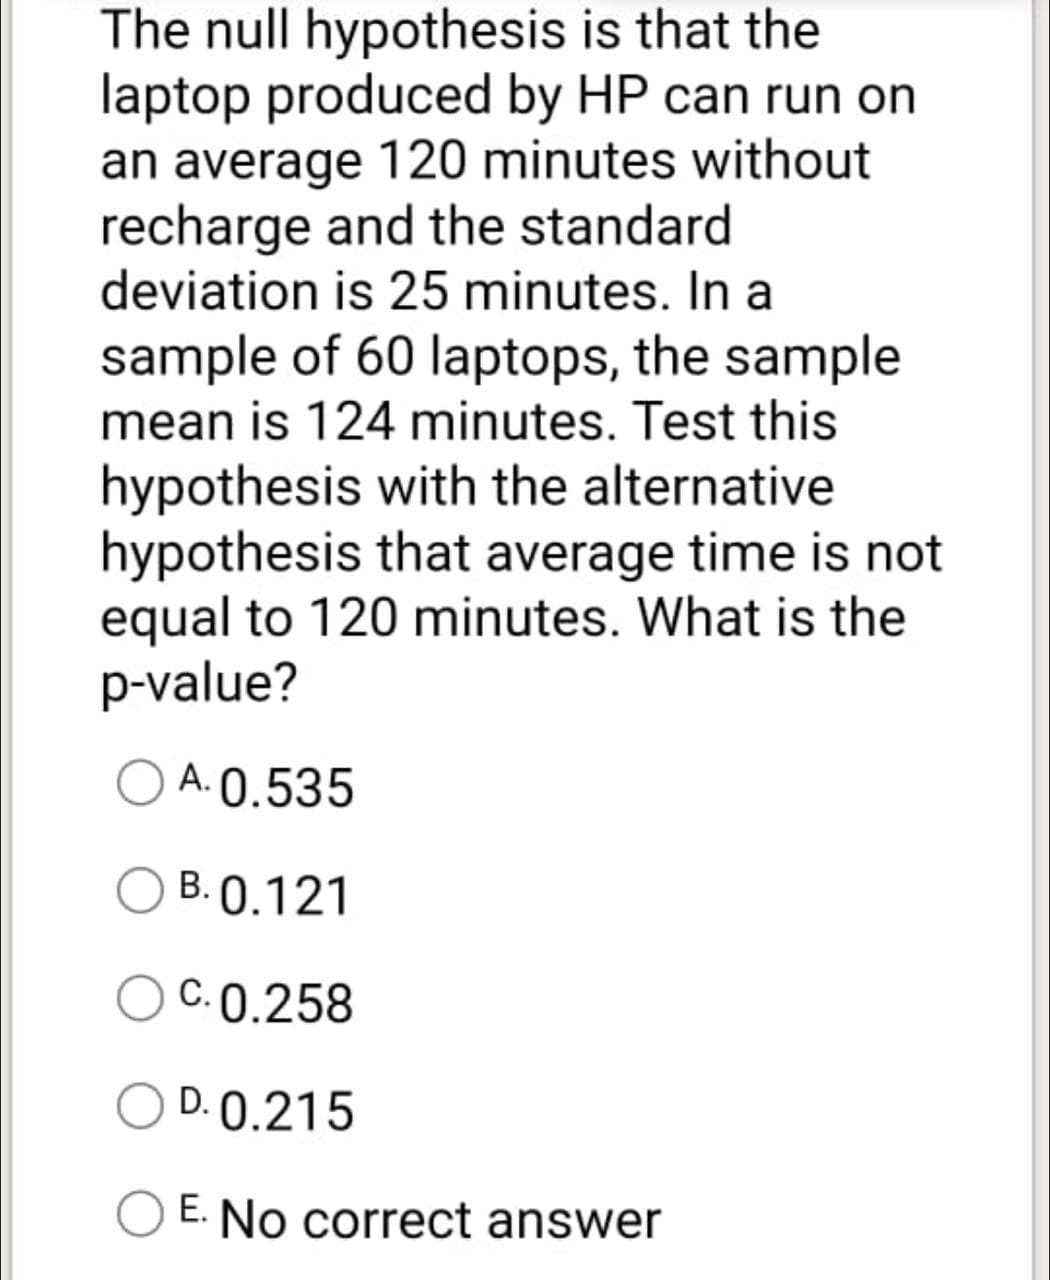 The null hypothesis is that the
laptop produced by HP can run on
an average 120 minutes without
recharge and the standard
deviation is 25 minutes. In a
sample of 60 laptops, the sample
mean is 124 minutes. Test this
hypothesis with the alternative
hypothesis that average time is not
equal to 120 minutes. What is the
p-value?
A. 0.535
О
B. 0.121
C. 0.258
D. 0.215
O E. No correct answer
